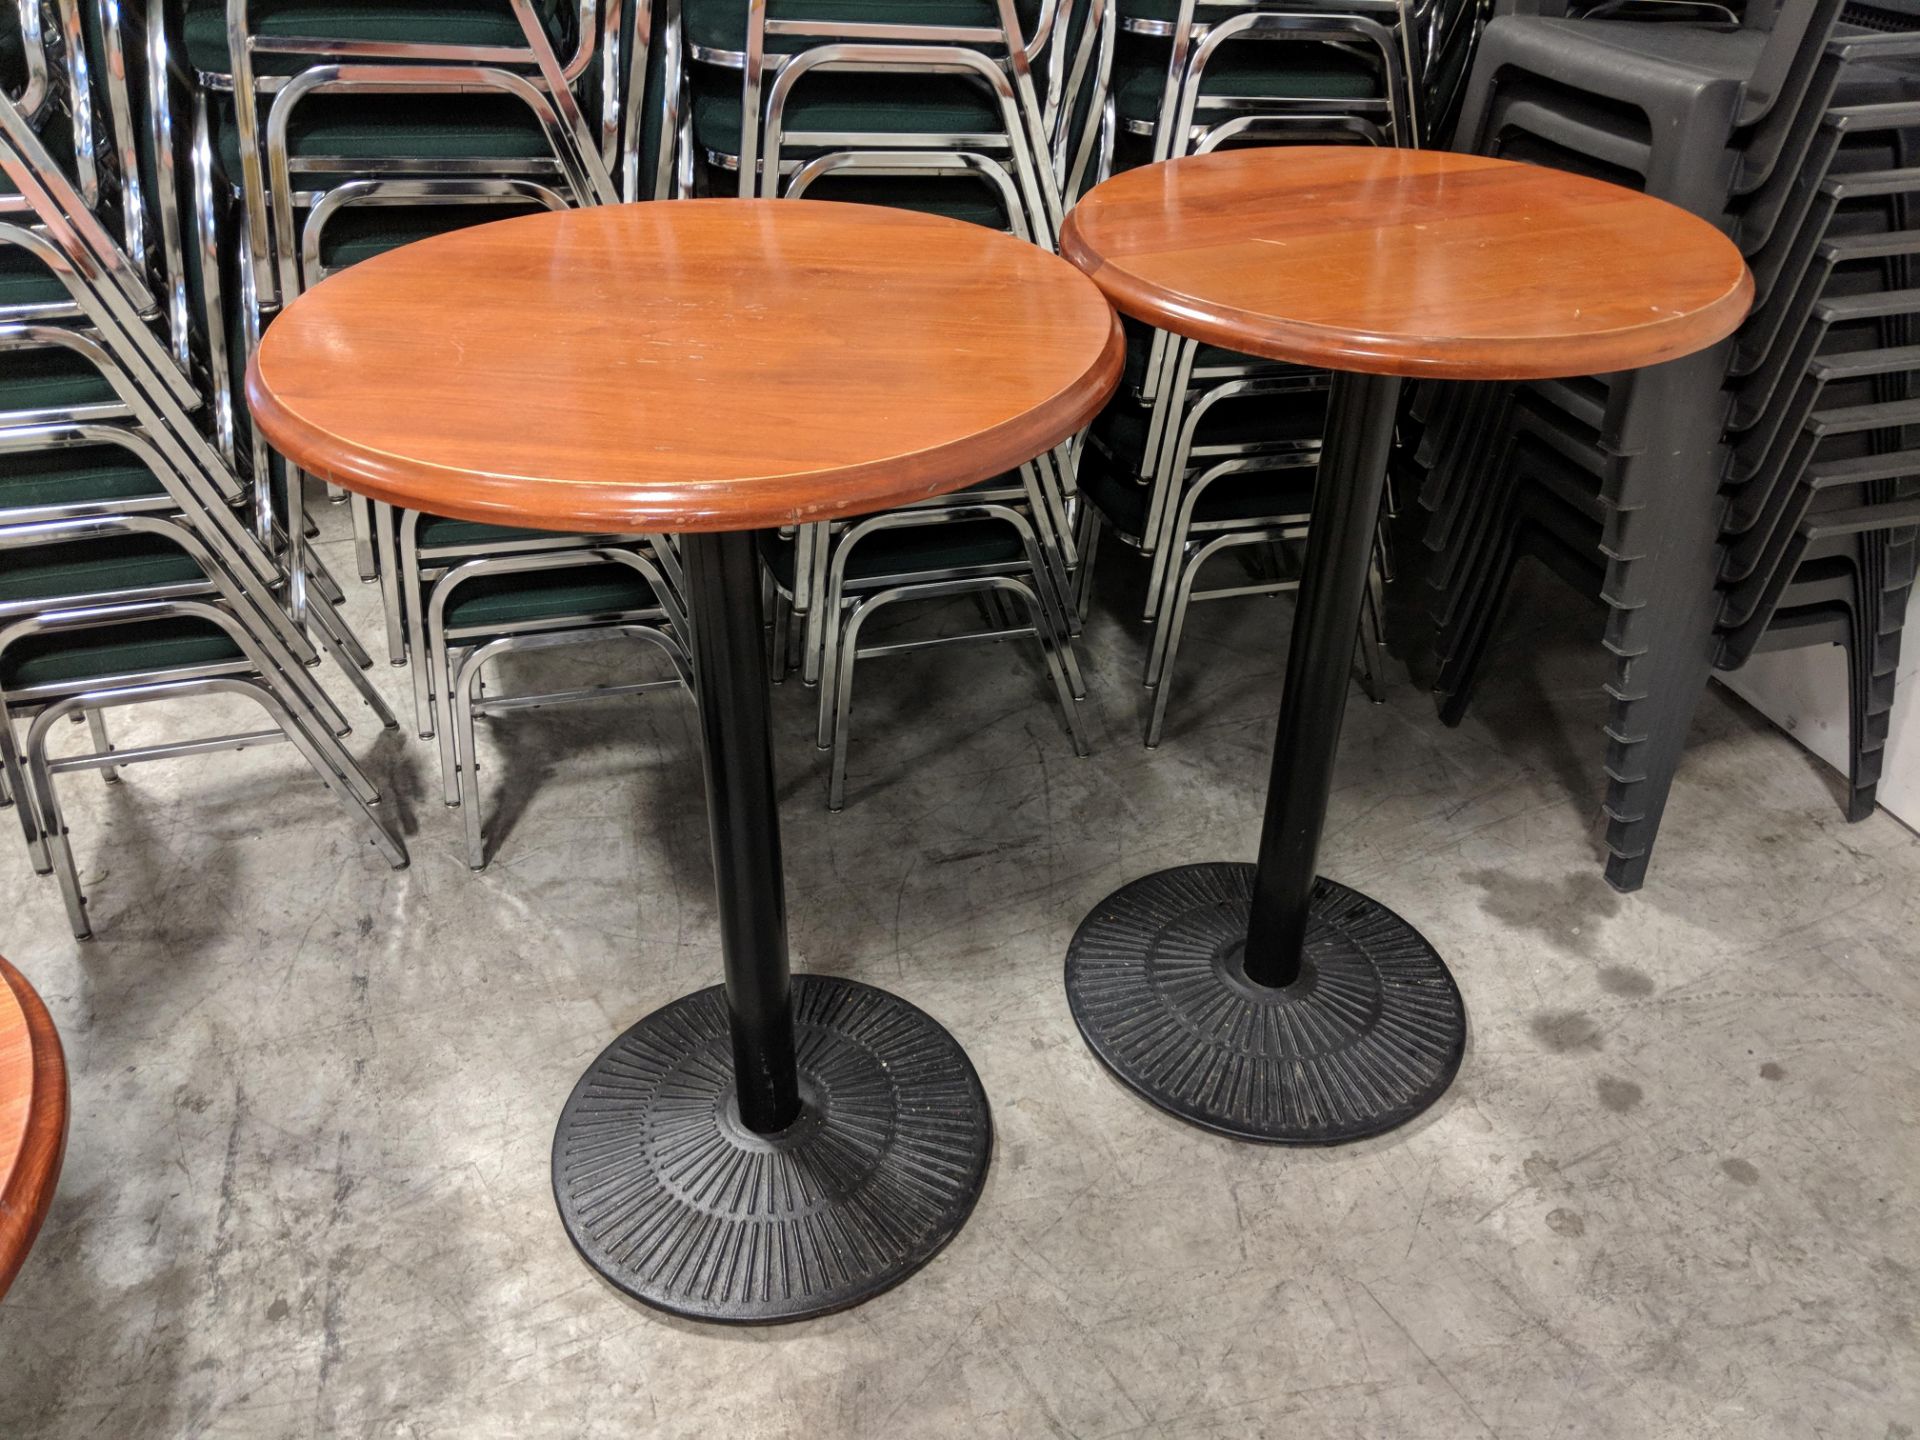 27" x 43" Bar Tables - Lot of 2